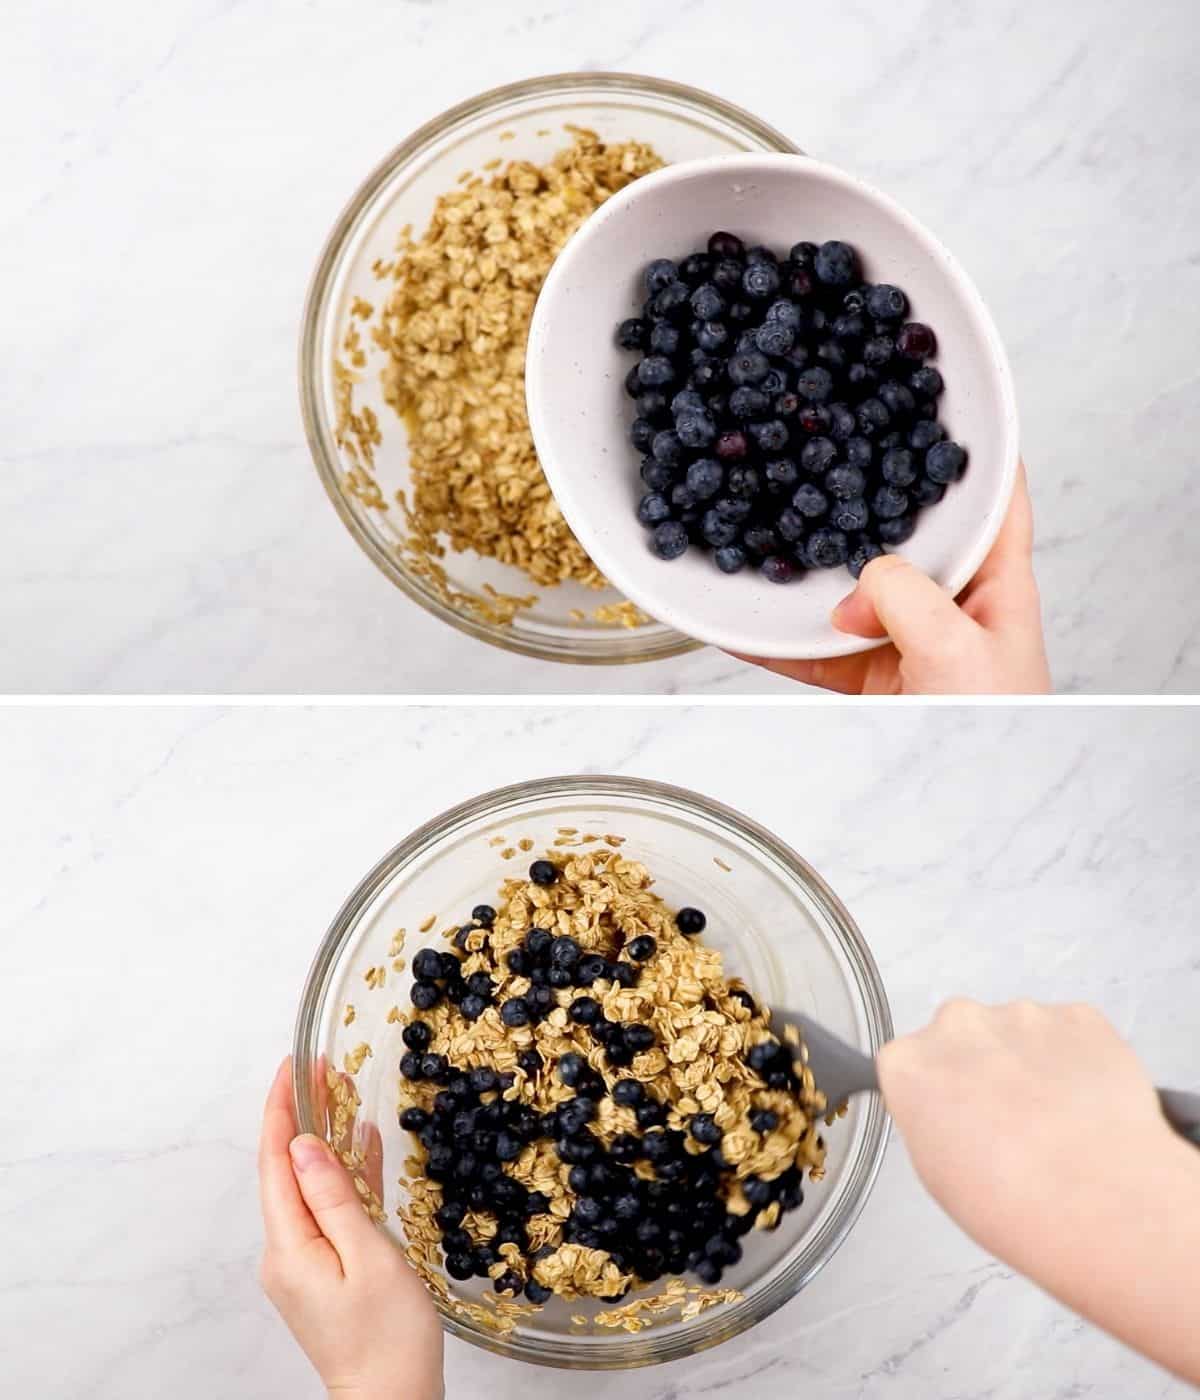 Process photos of adding blueberries to the oatmeal mixture.